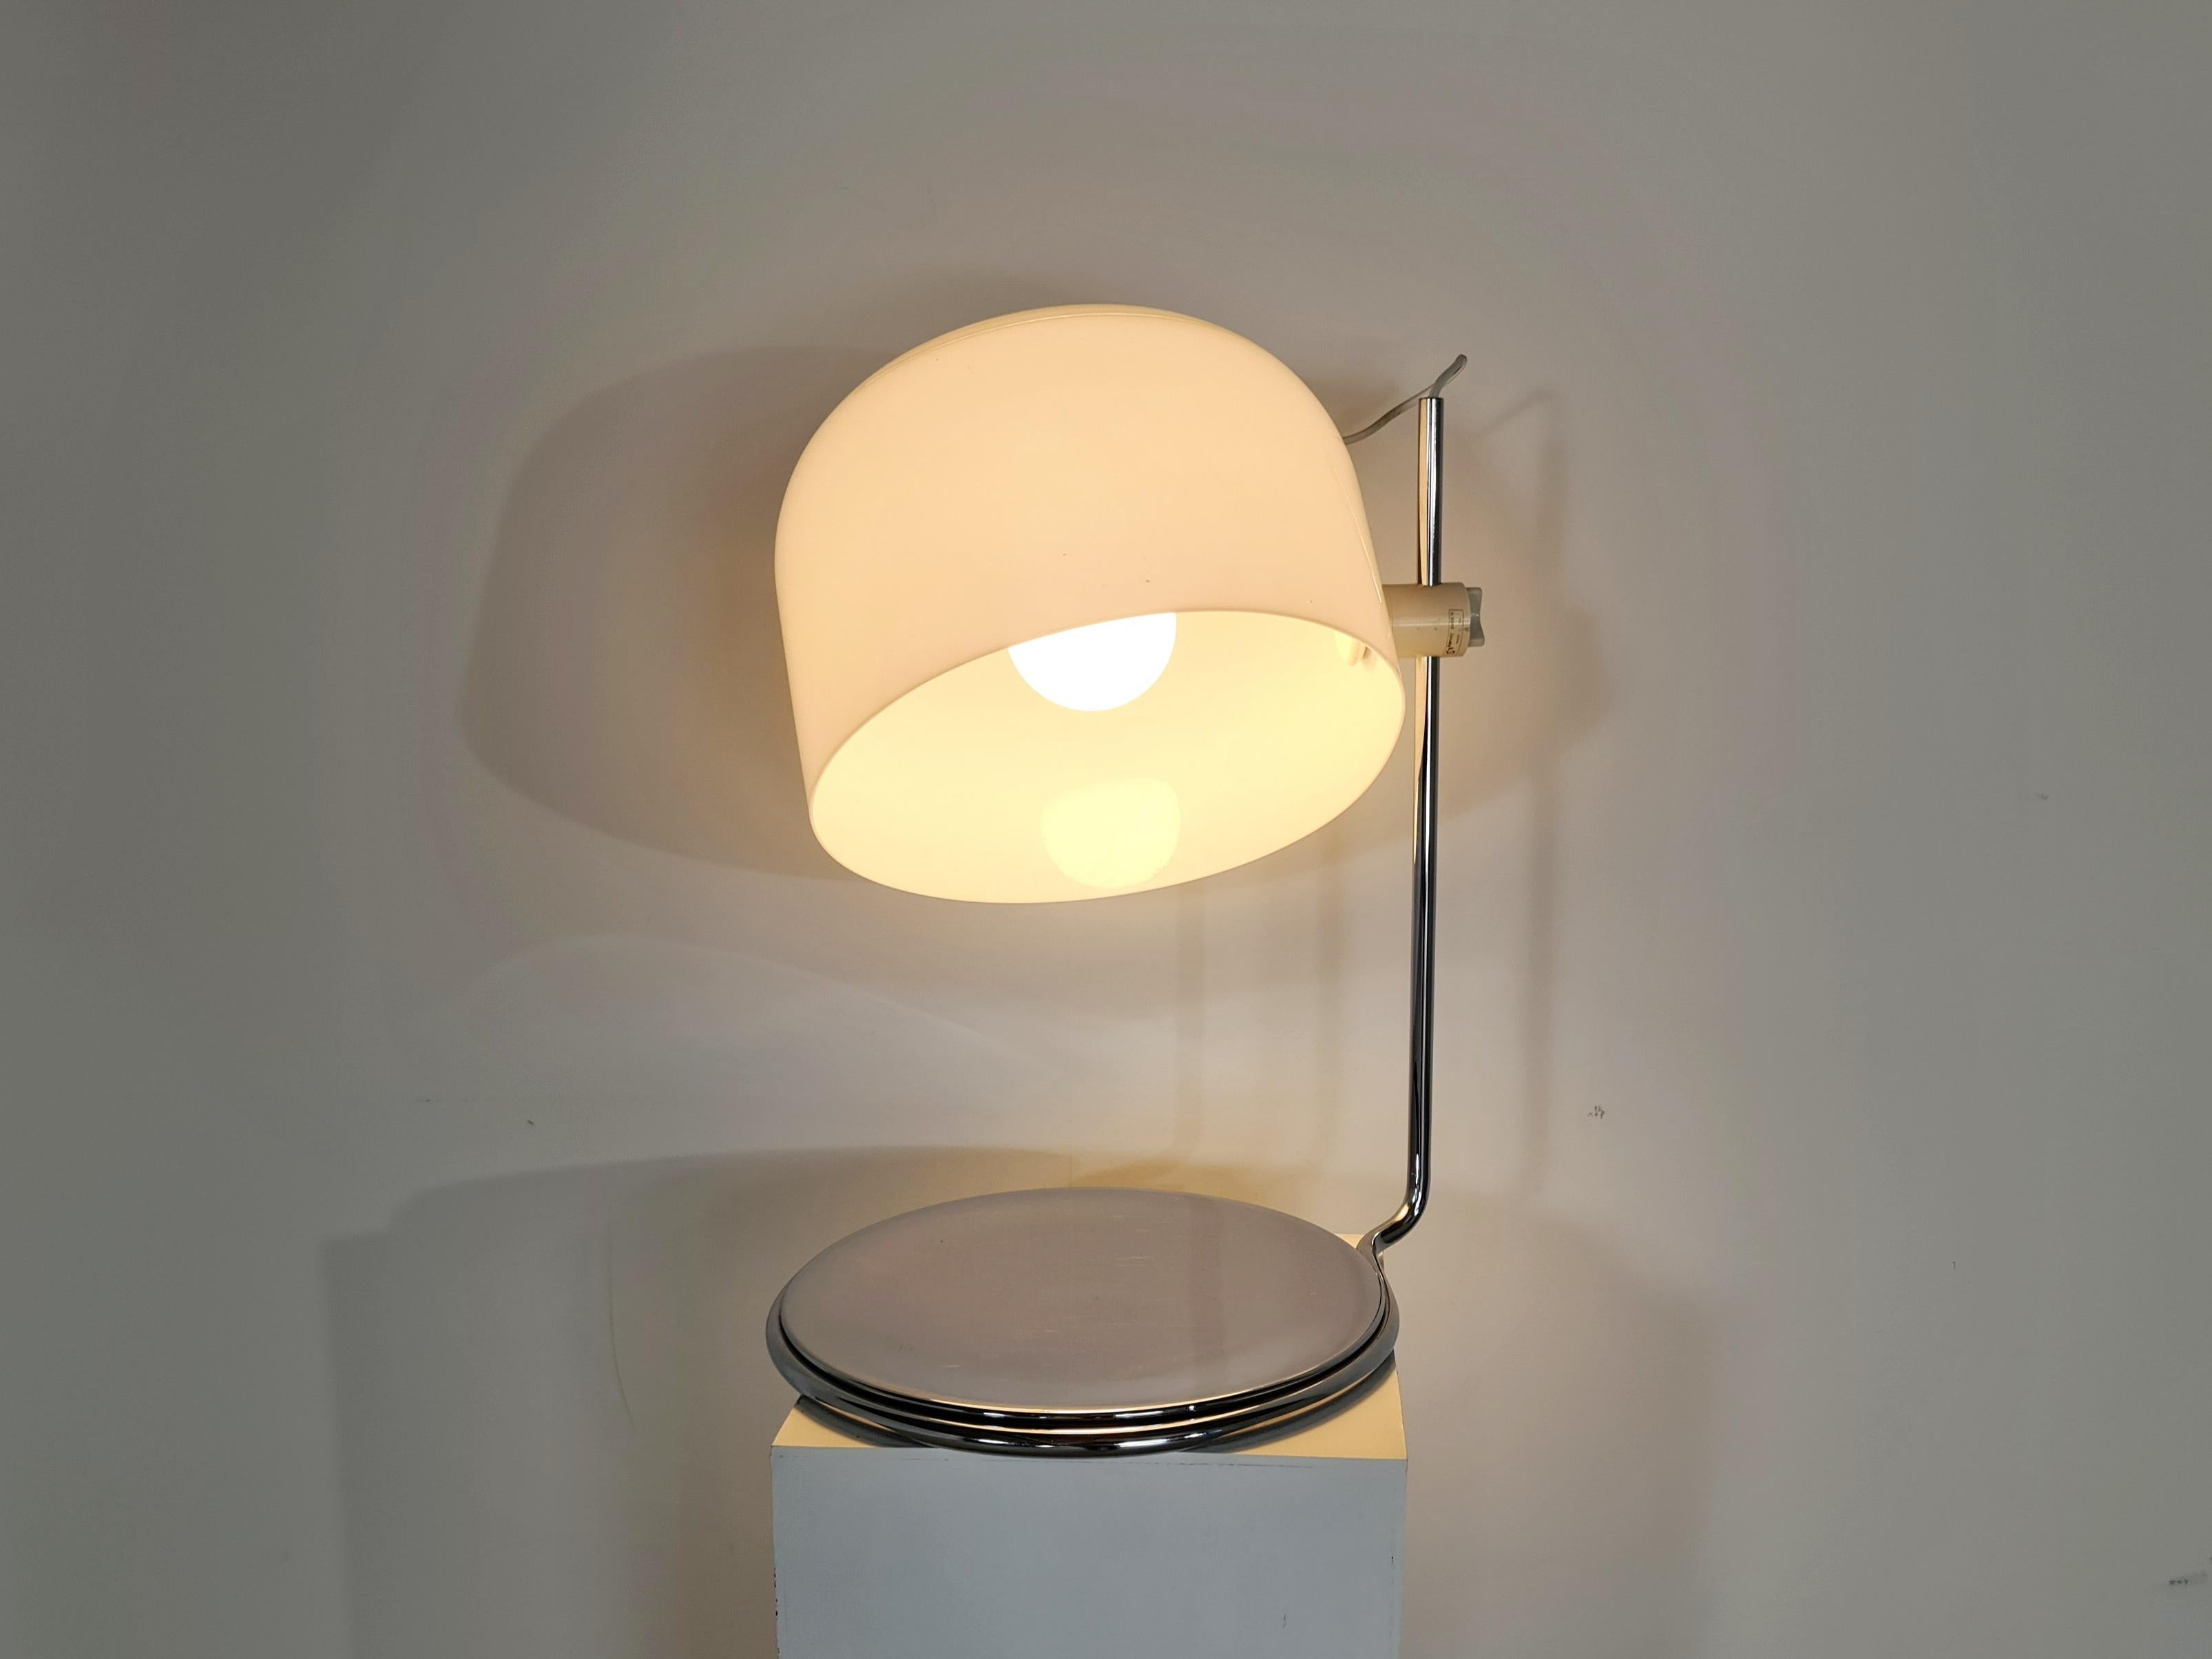 A rare table lamp designed in the 60s by Harvey Guzzini for Guzzini, Italy. Chromed metal foot and frame with white plastic lampshade. The lampshade is very adjustable in position and gives a beautiful light when it is on.

The chrome foot still